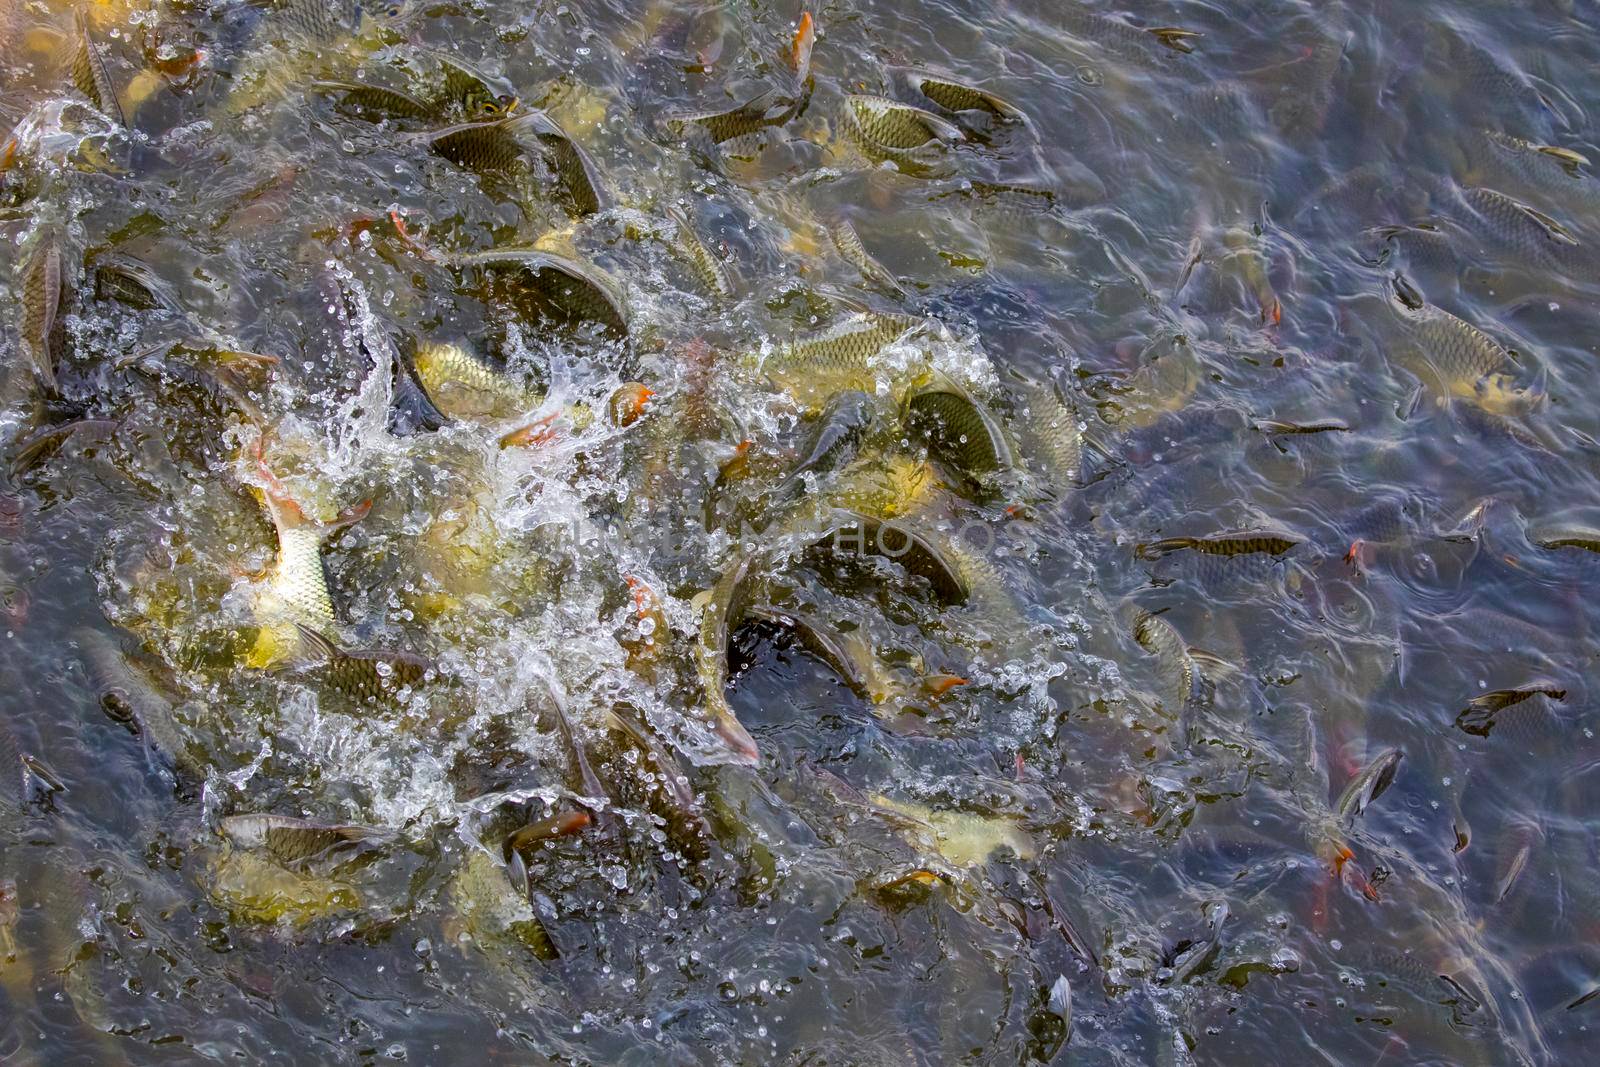 Image of a fish herd in the water(Java barb, Silver barb). Aquatic animals